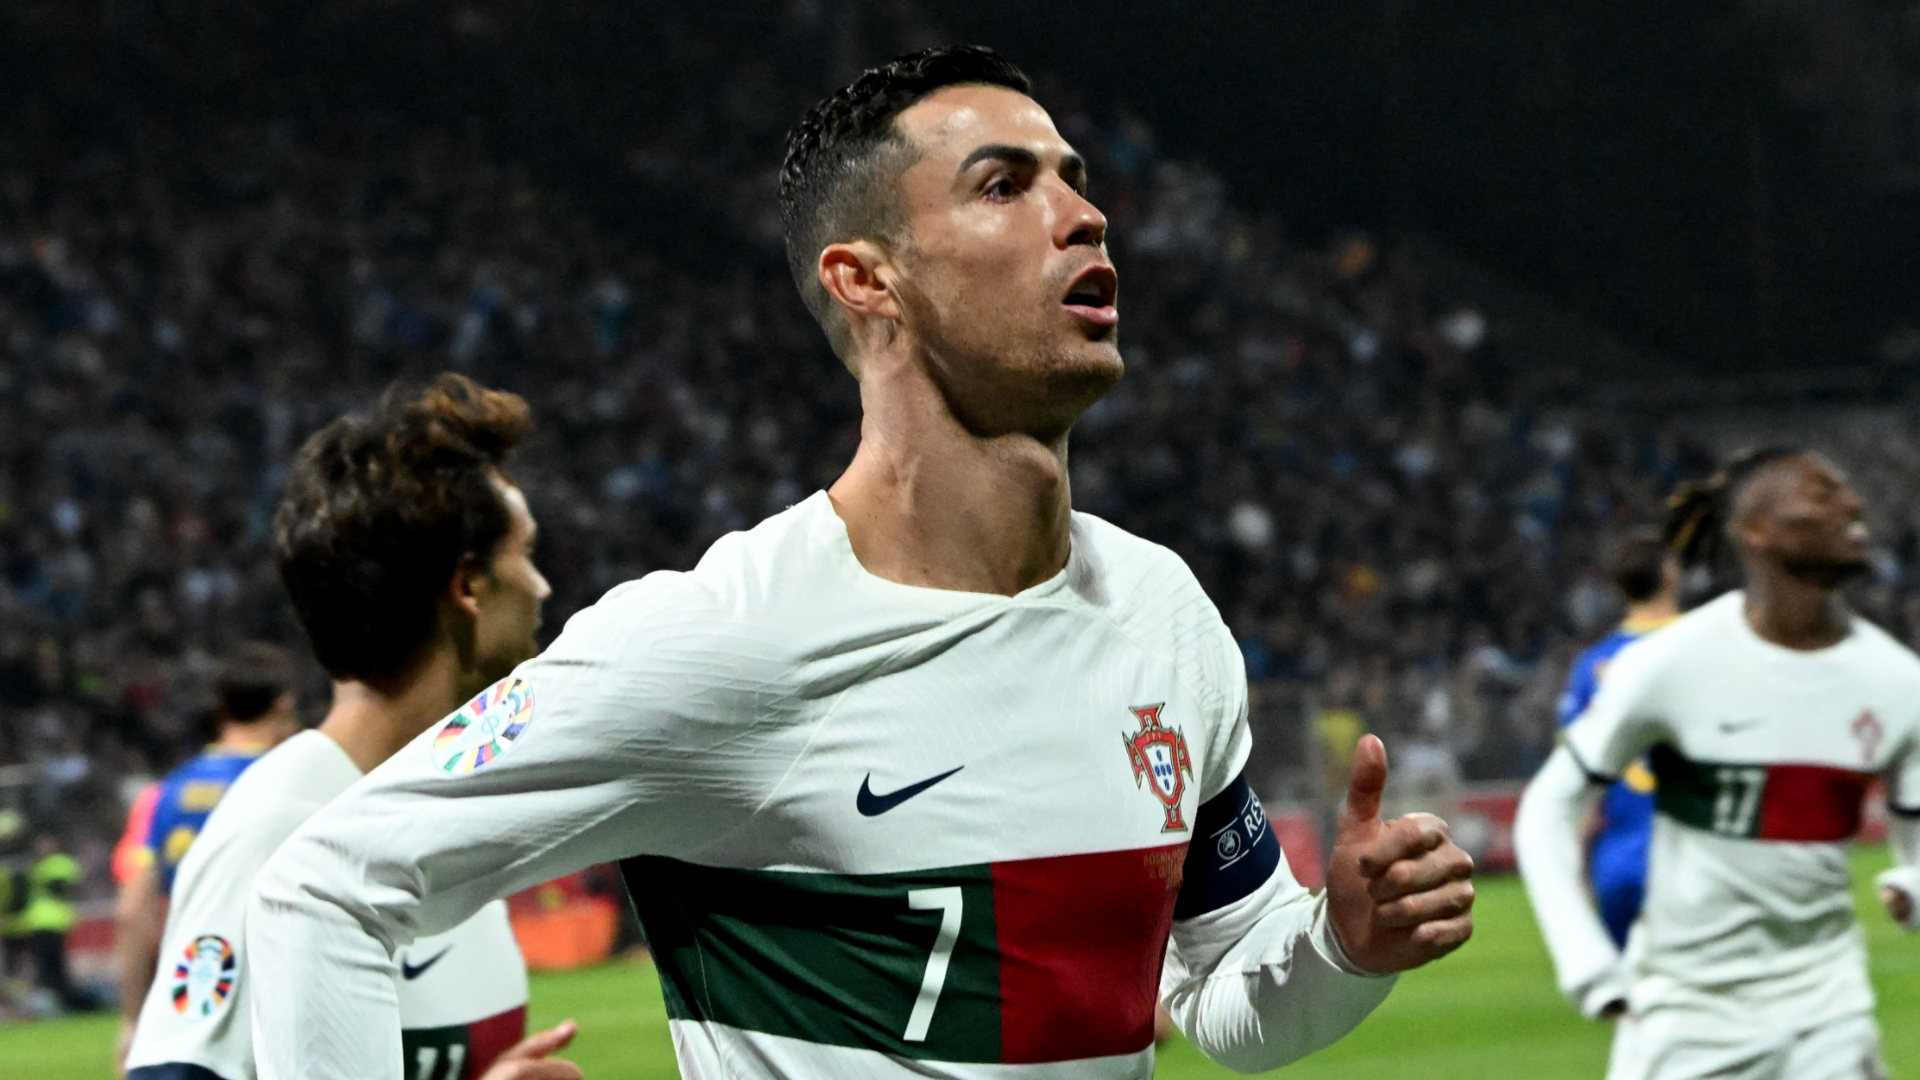 Liechtenstein vs Portugal Live stream, TV channel, kick-off time and where to watch Goal US